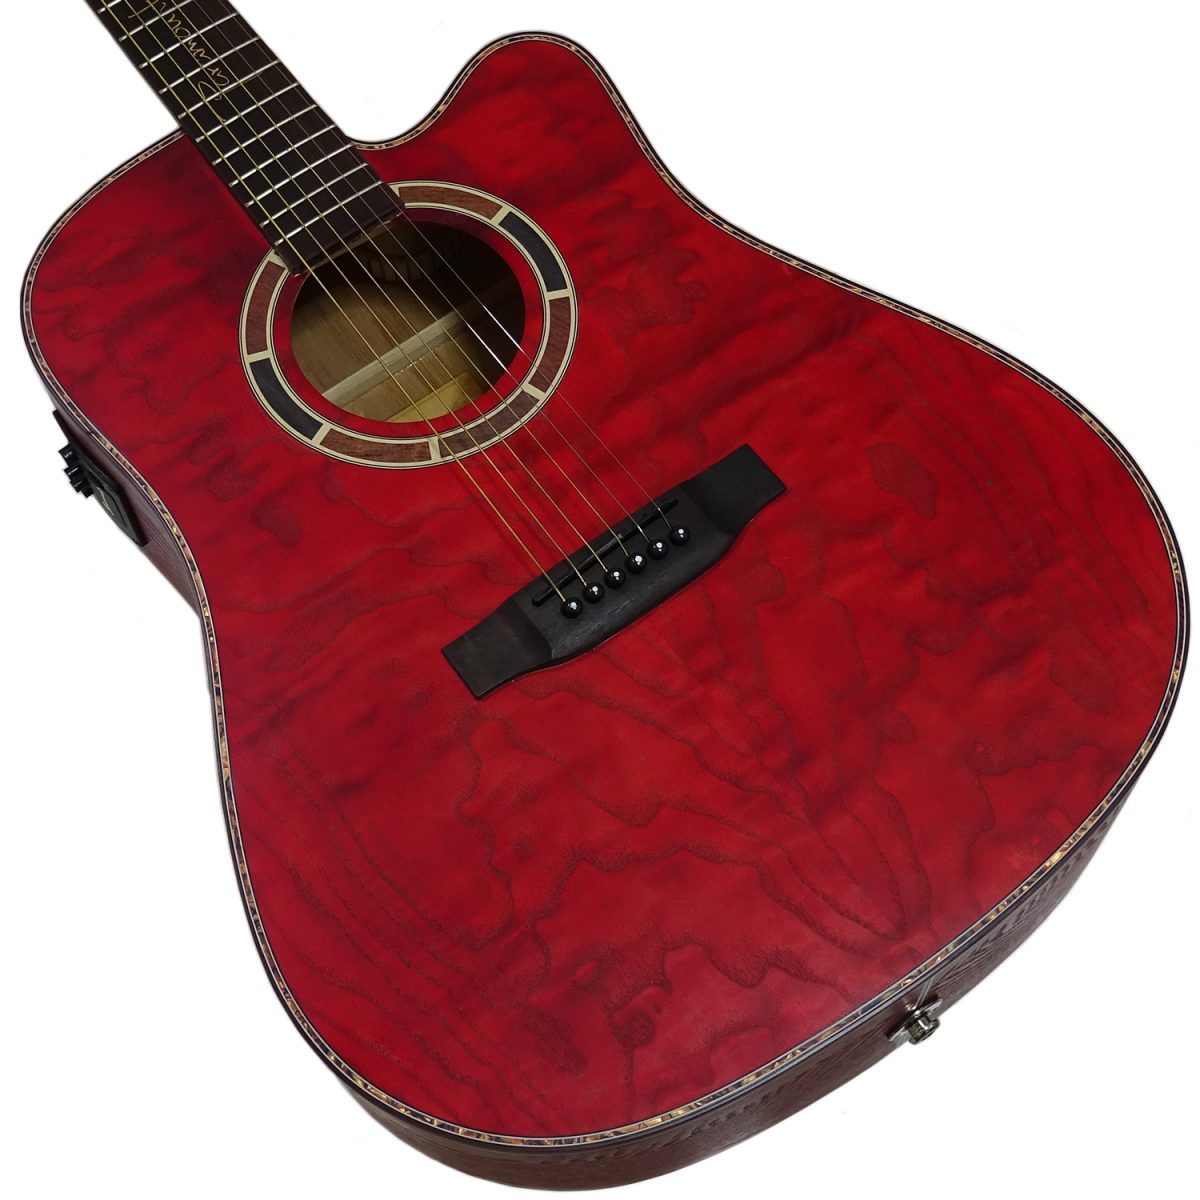 Paramount F4170CEQ Body (Red Color)